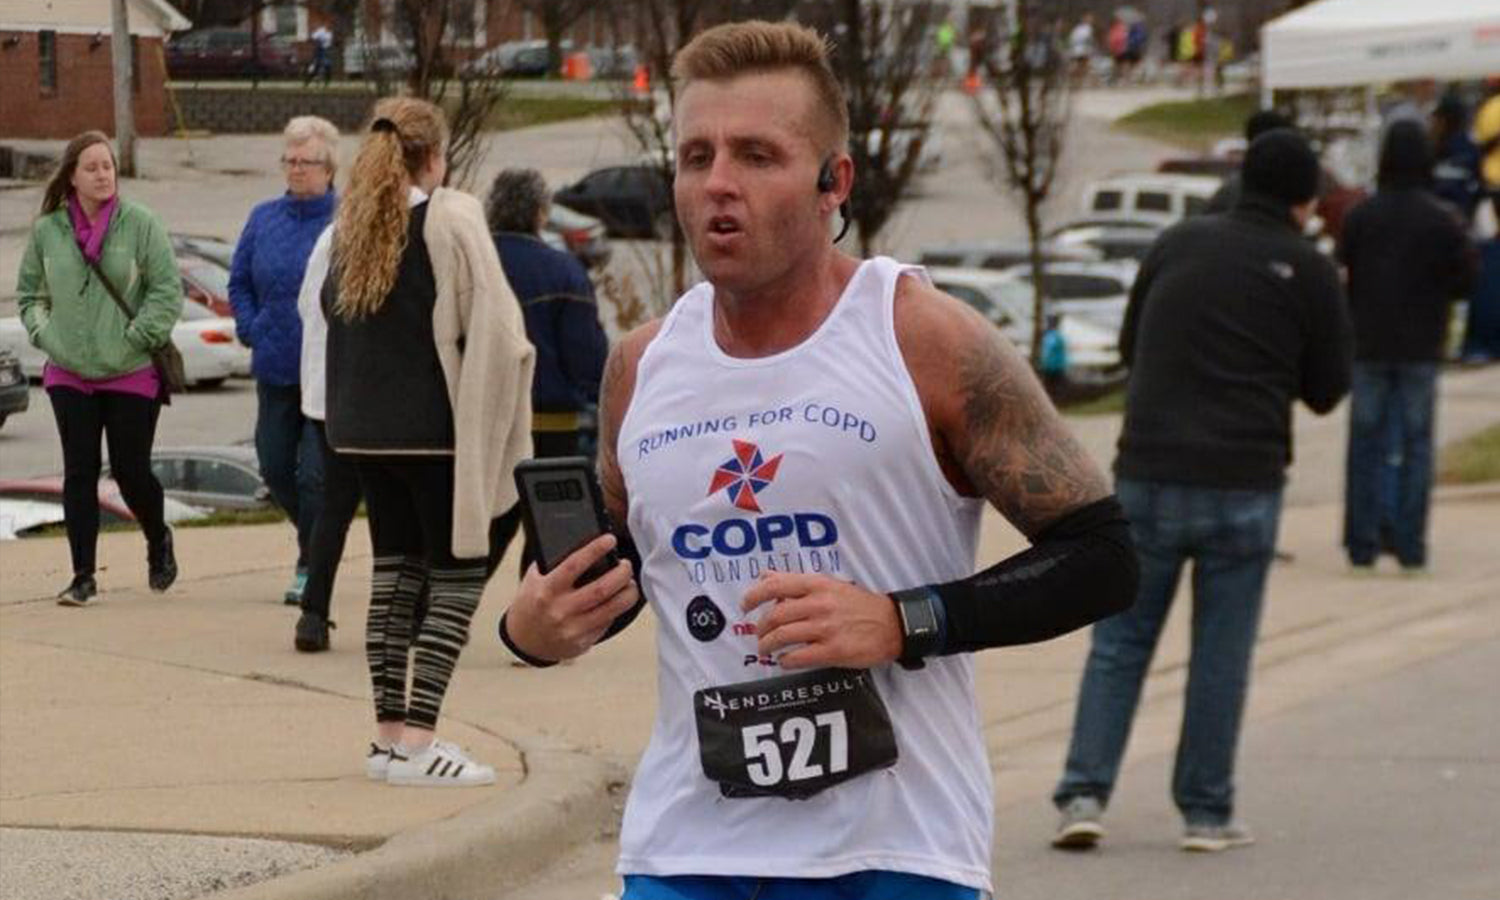 Justin Daniels On Running for COPD Awareness